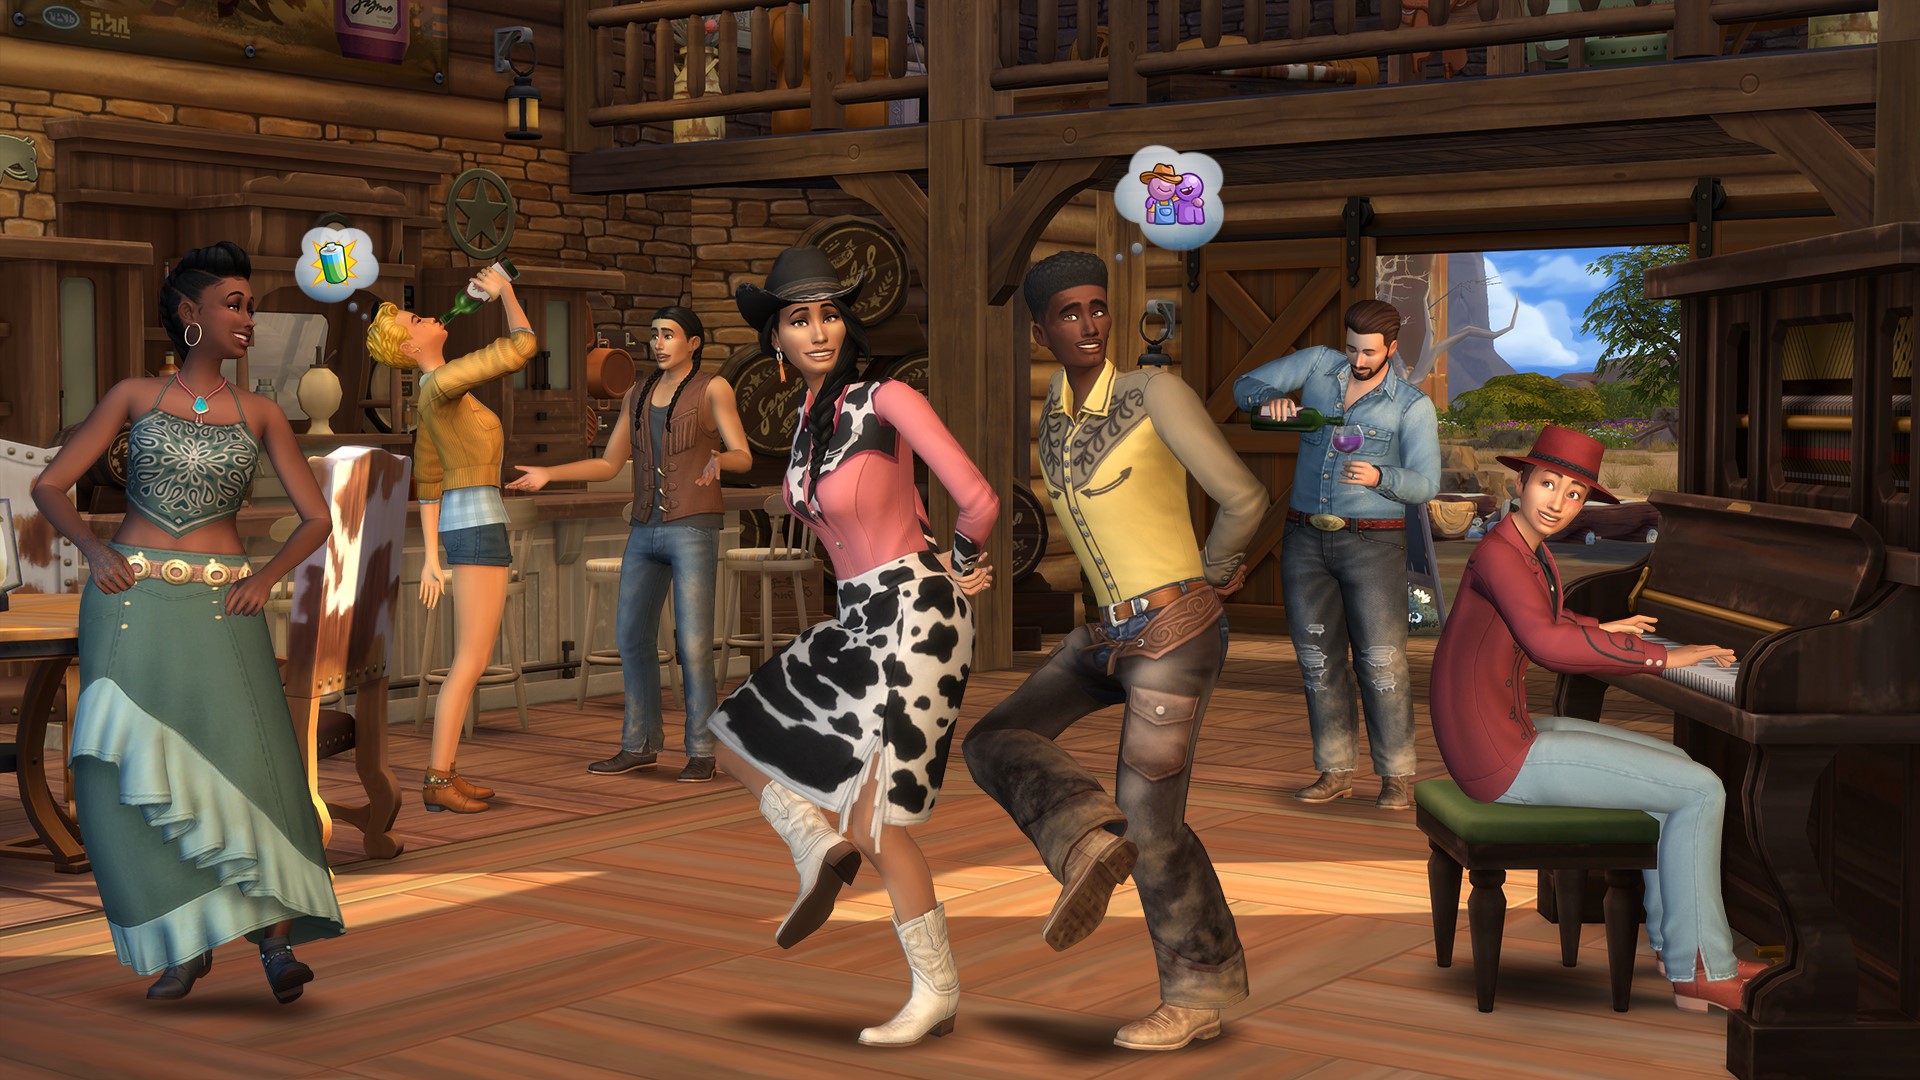 Sims 5 may soon be unveiled by EA, as Sims 4 goes free-to-play